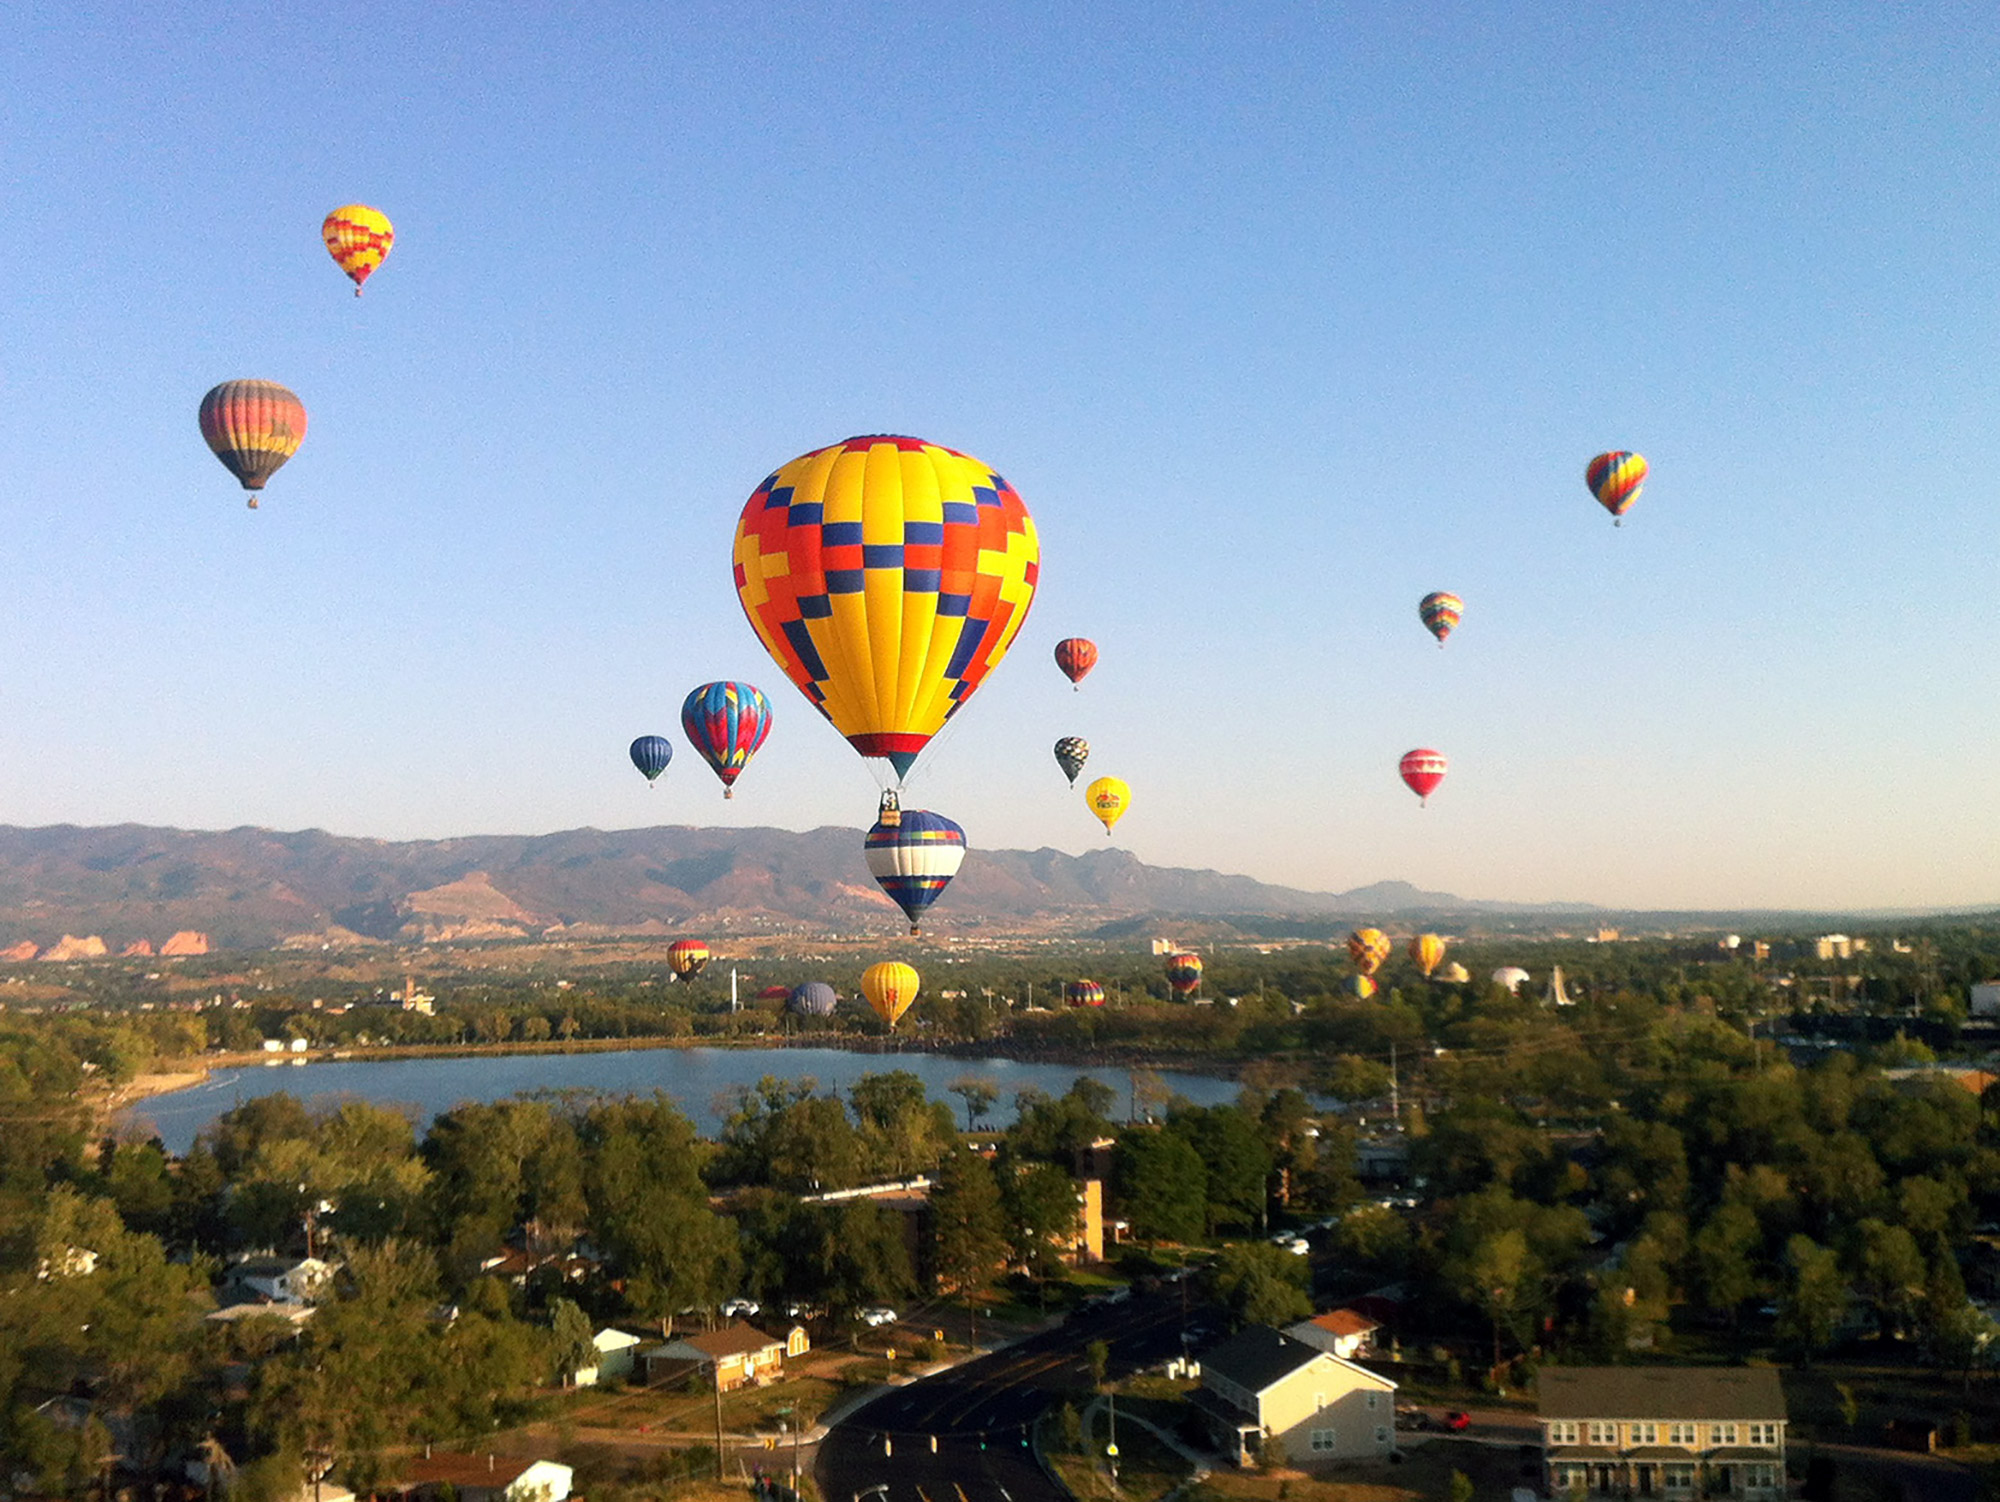 Dozens of hot air balloons taking off in the morning next to a lake with mountains in the background